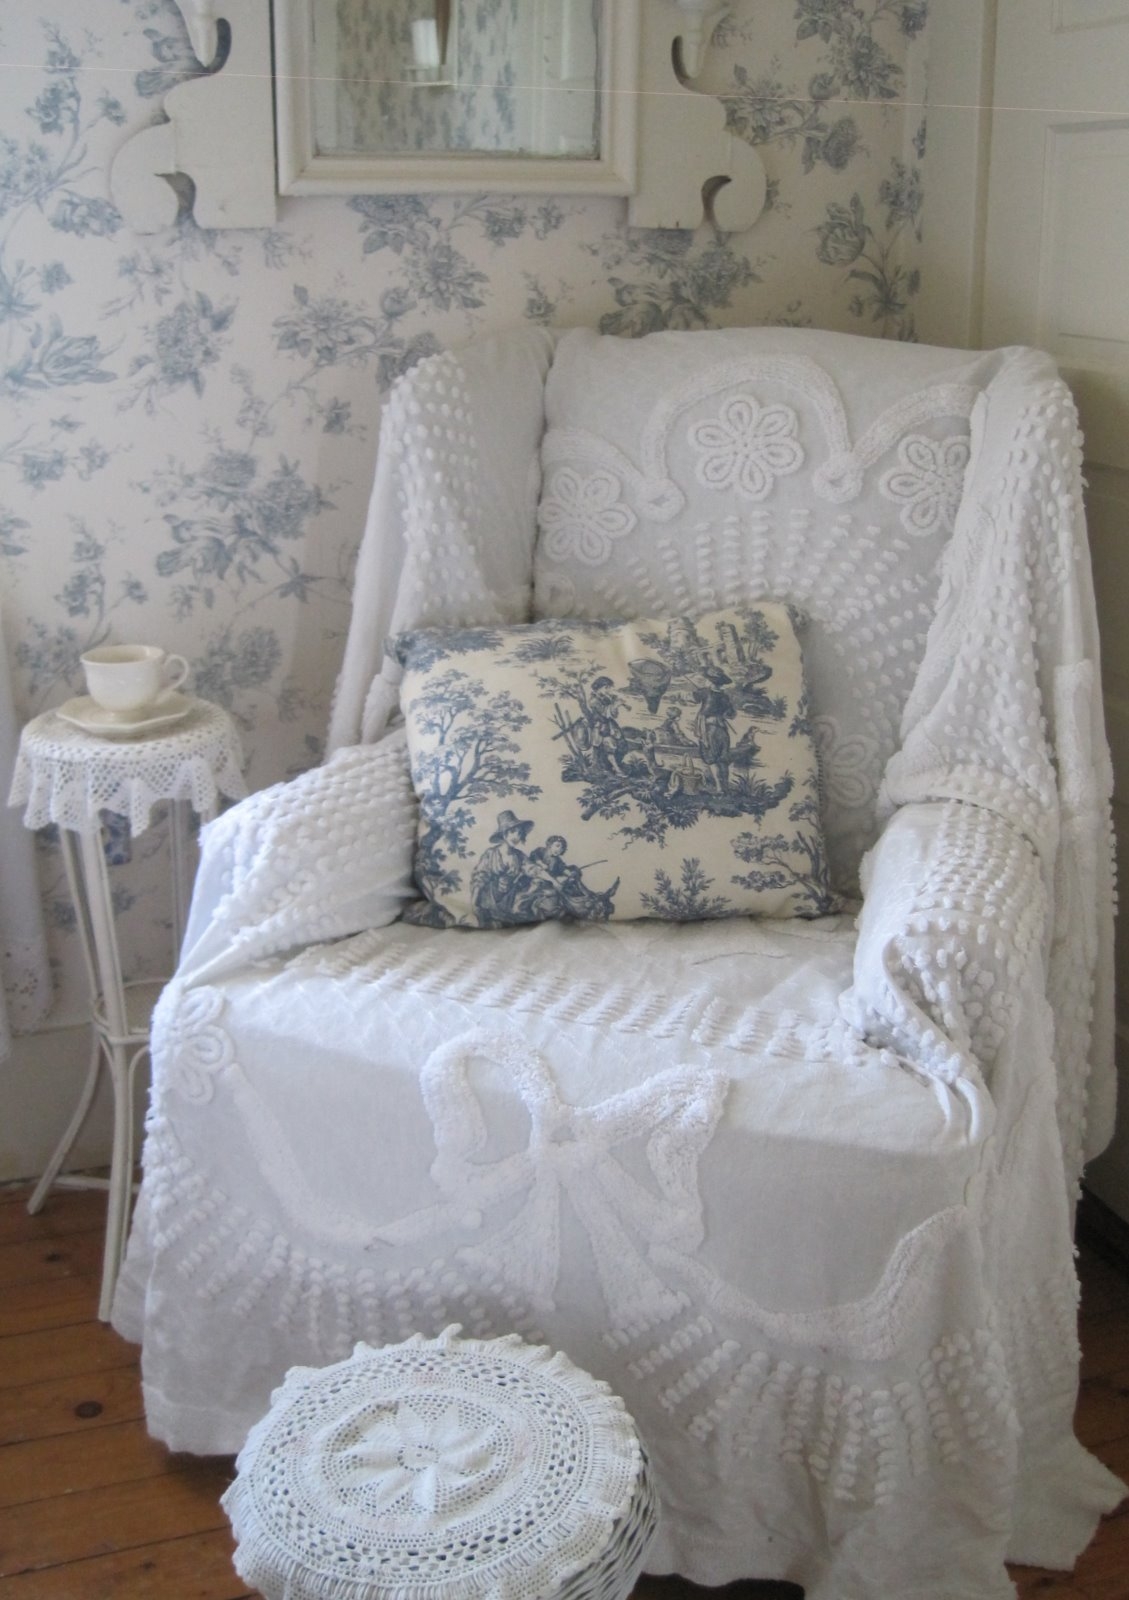 Shabby chic dining chair covers